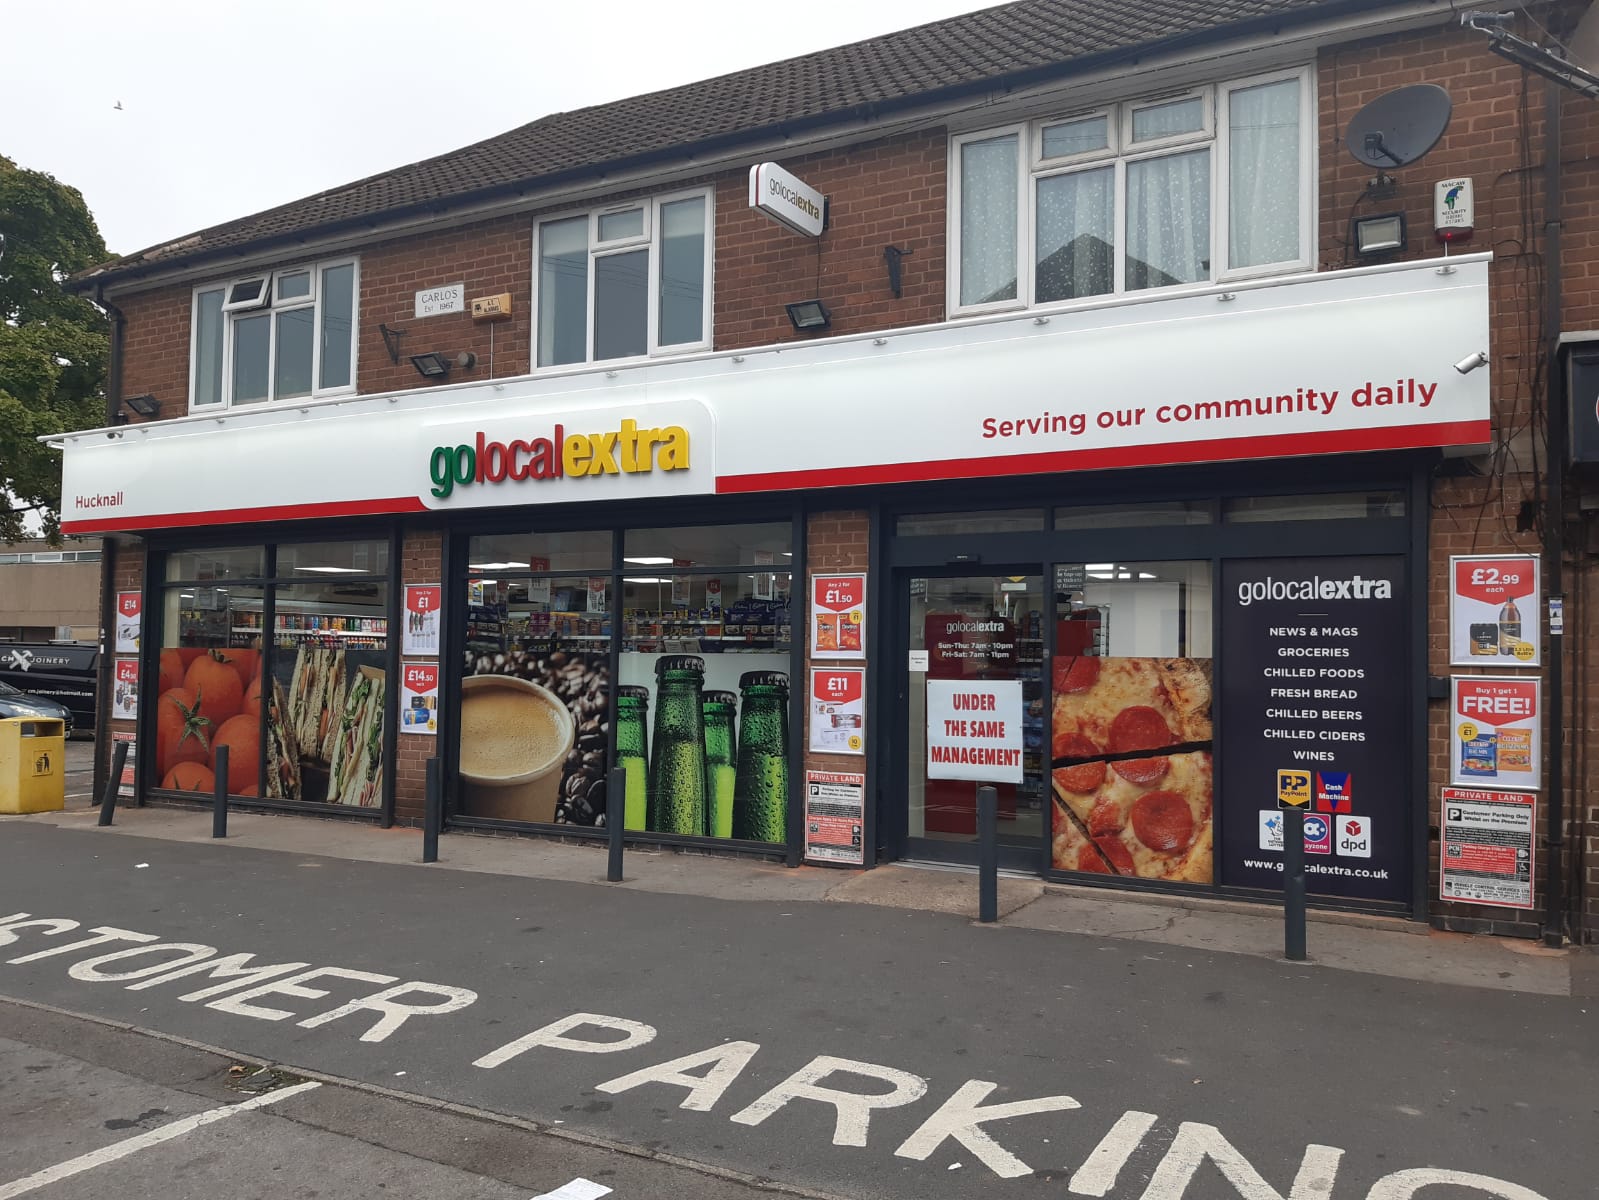 Second store for independent retailer as new Go Local Extra opens in Hucknall